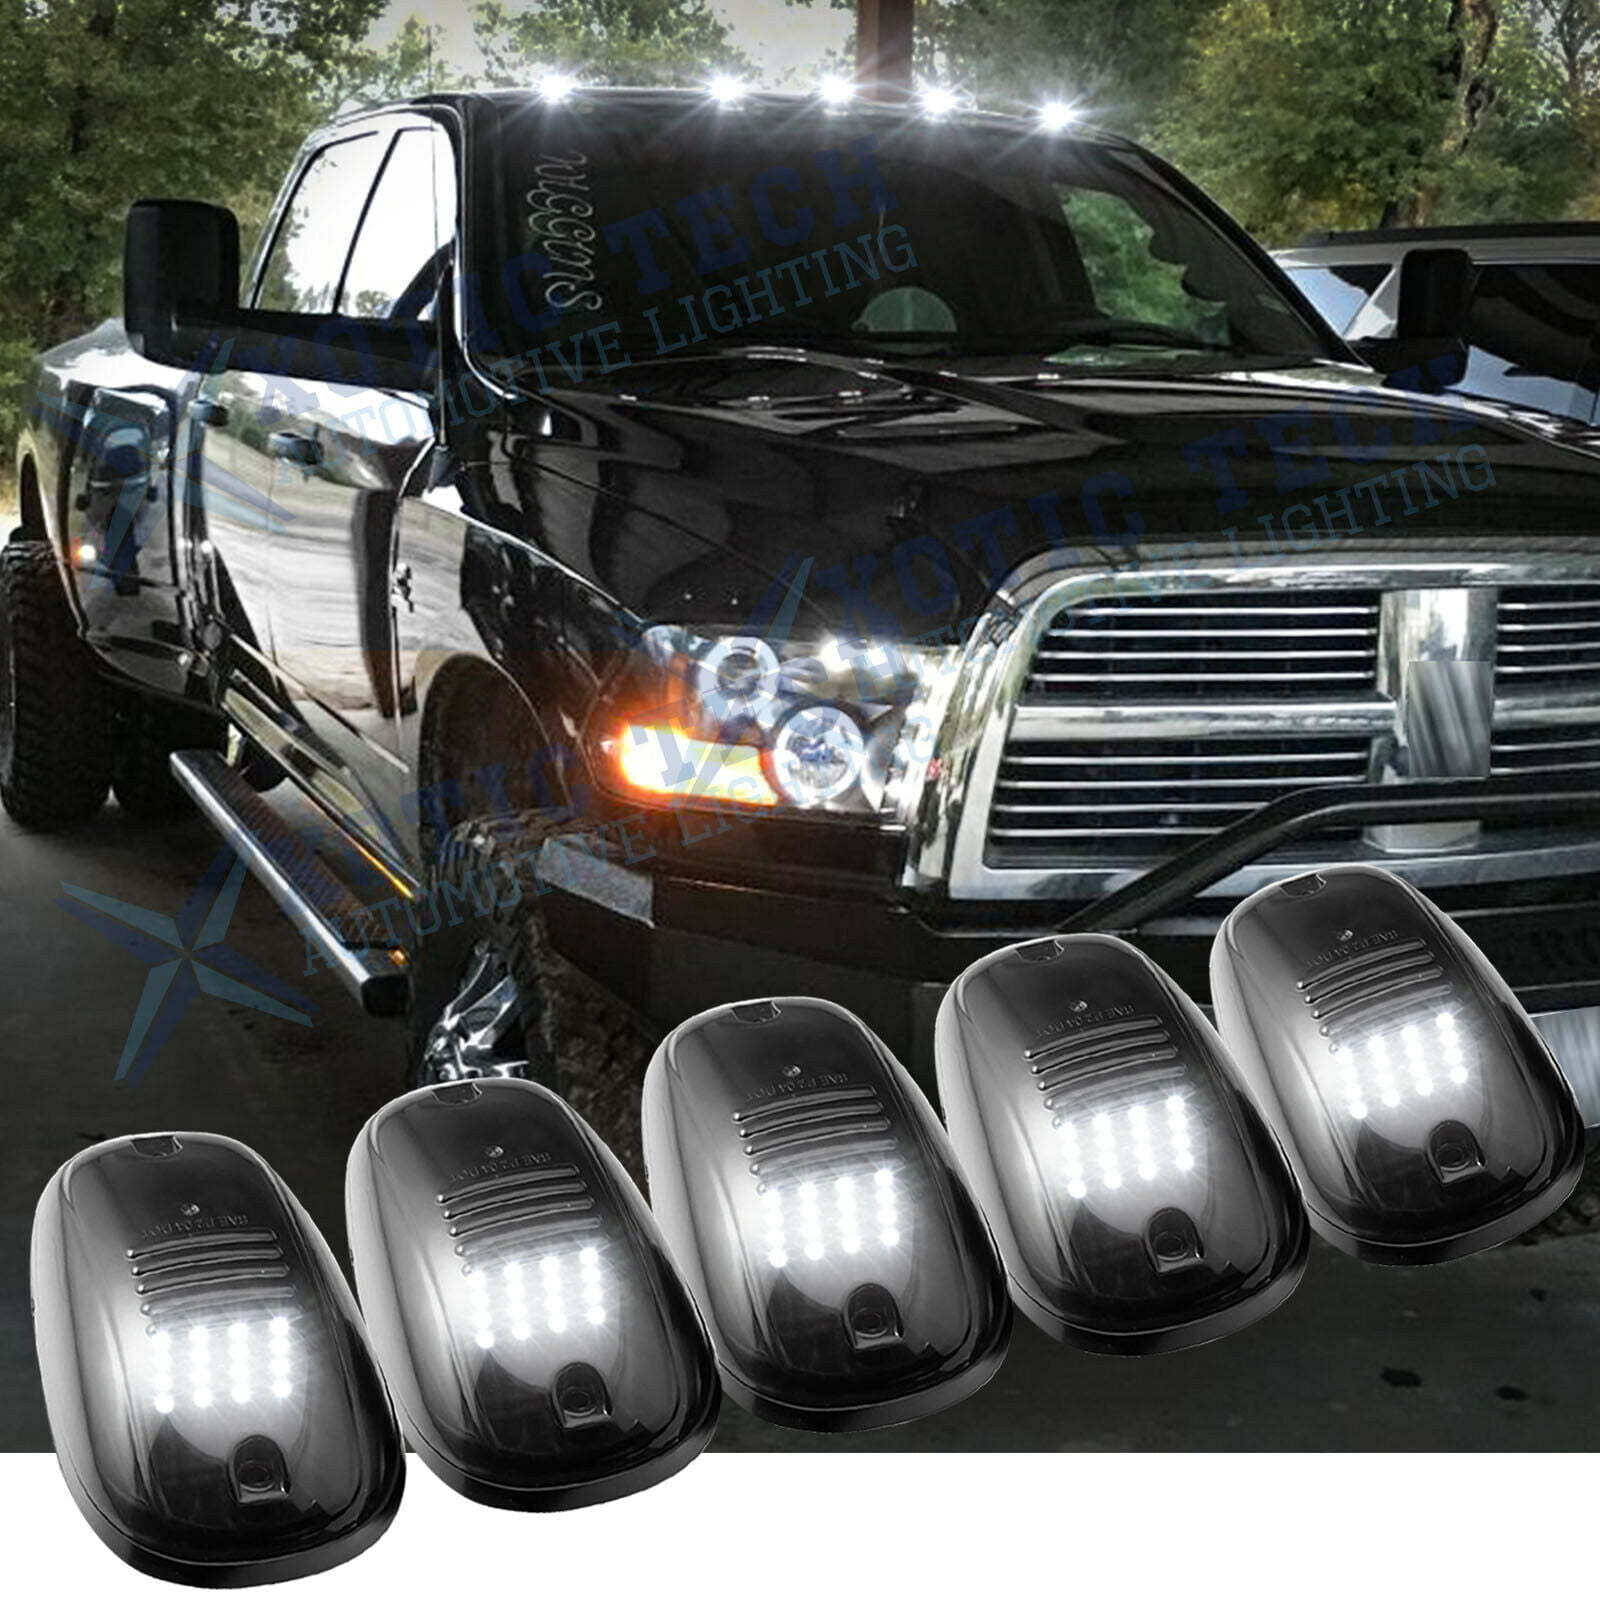 5pcs Cab Roof Clearance Marker Lamps Roof Running Light Smoked Lens White LED For Dodge RAM 1500 2500 3500 Ford F-Series Chevy/GMC Trucks 